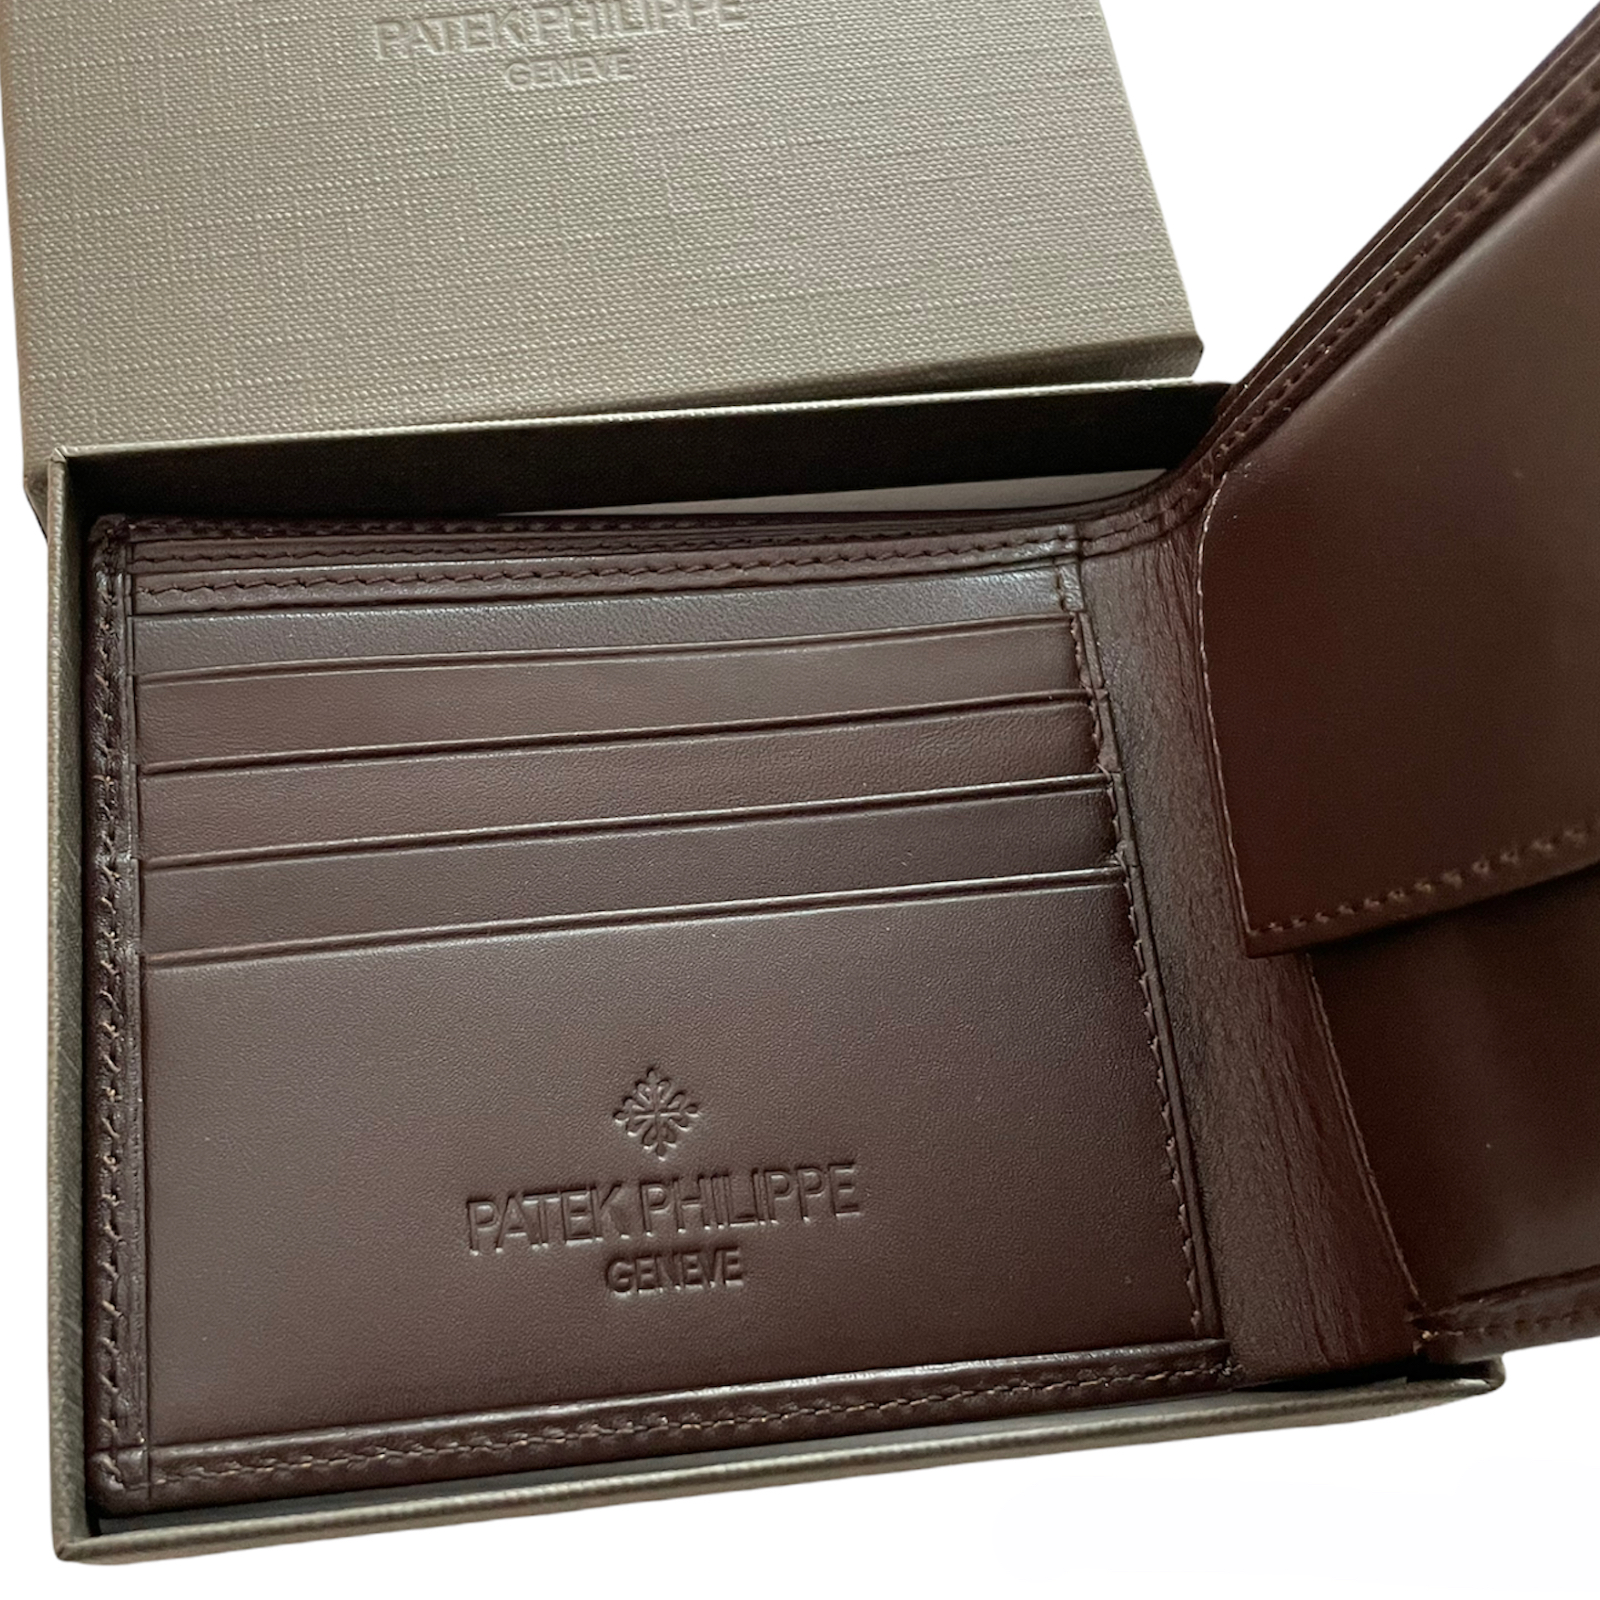 Patek Philippe Brown Leather Wallet with Box Rare!!!